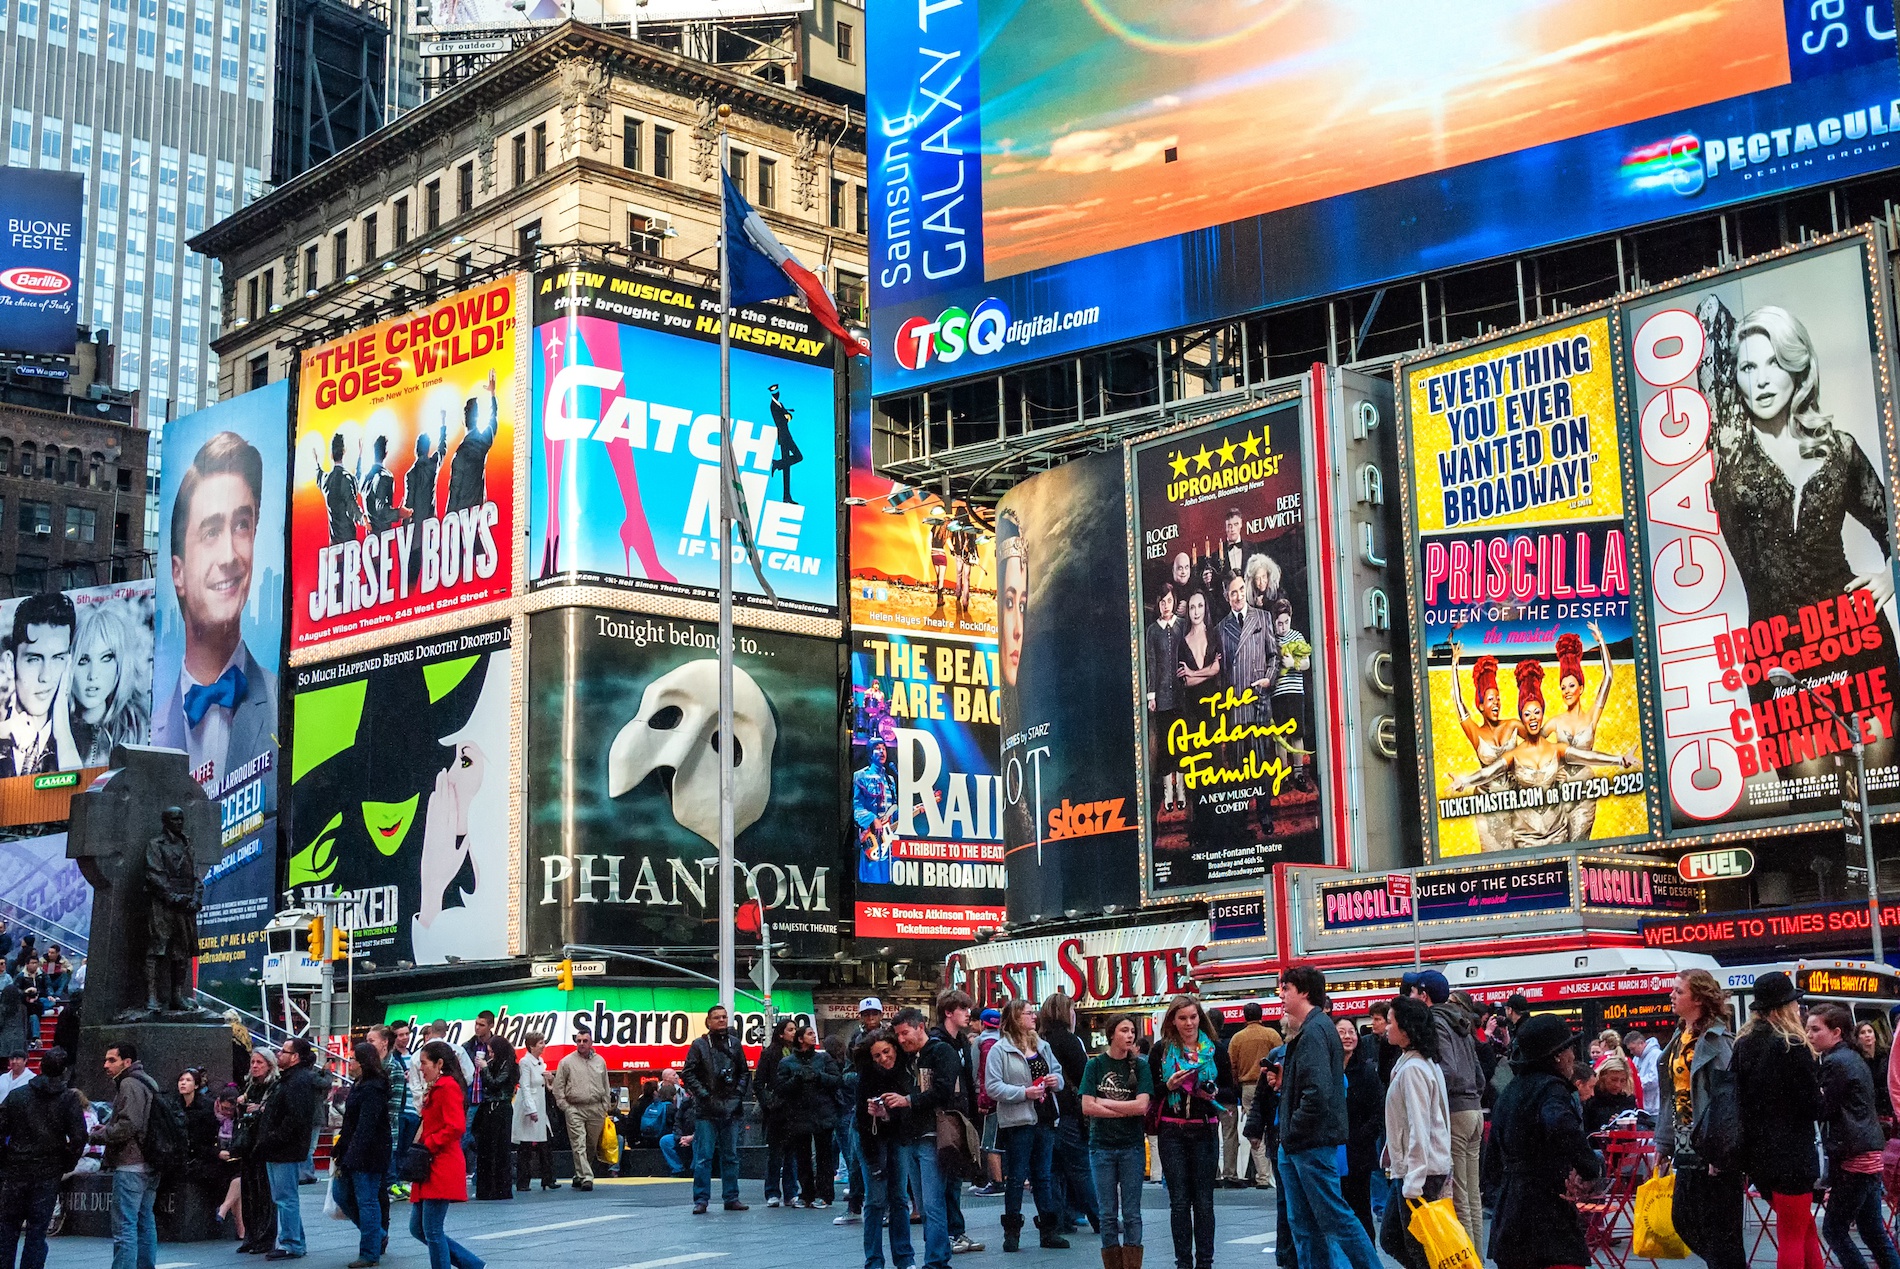 How Actors Are Fighting For a More Equitable Broadway